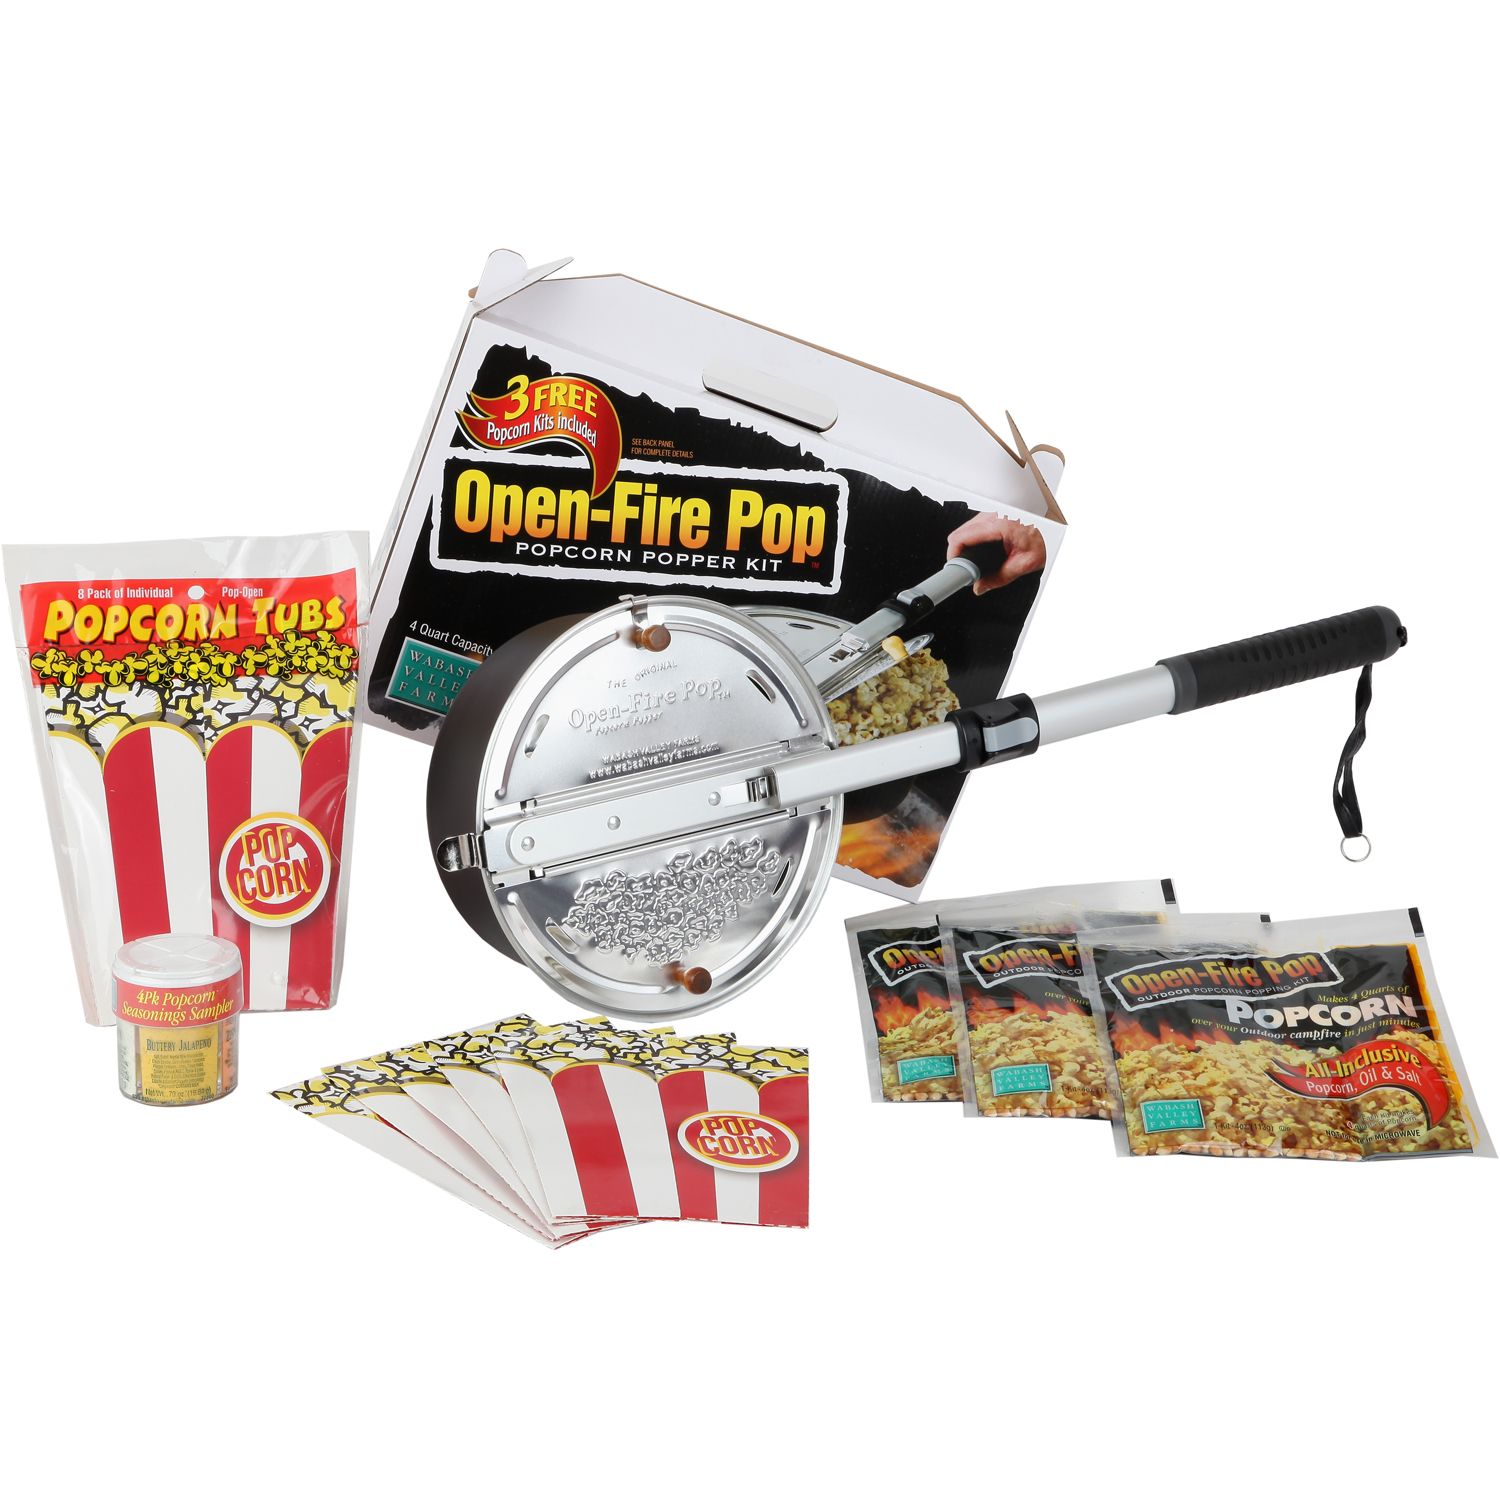 Mega Pop Complete Kits For use in 12oz. Poppers